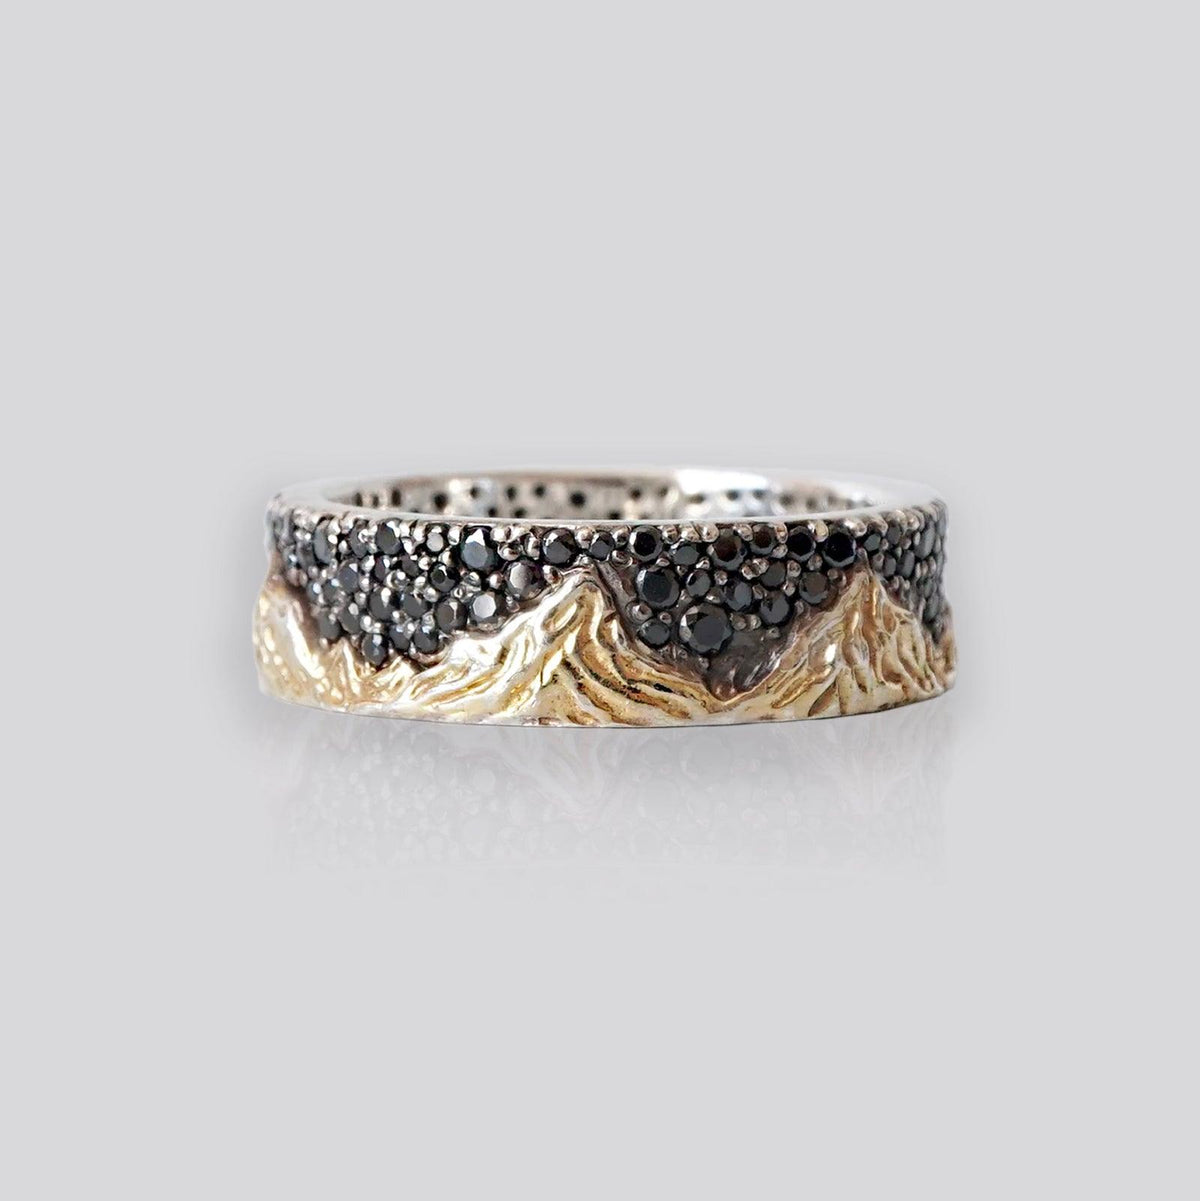 Mixed Metal Montona Black Diamond Ring in Sterling Silver and 14K Gold, 7.2mm - Tippy Taste Jewelry